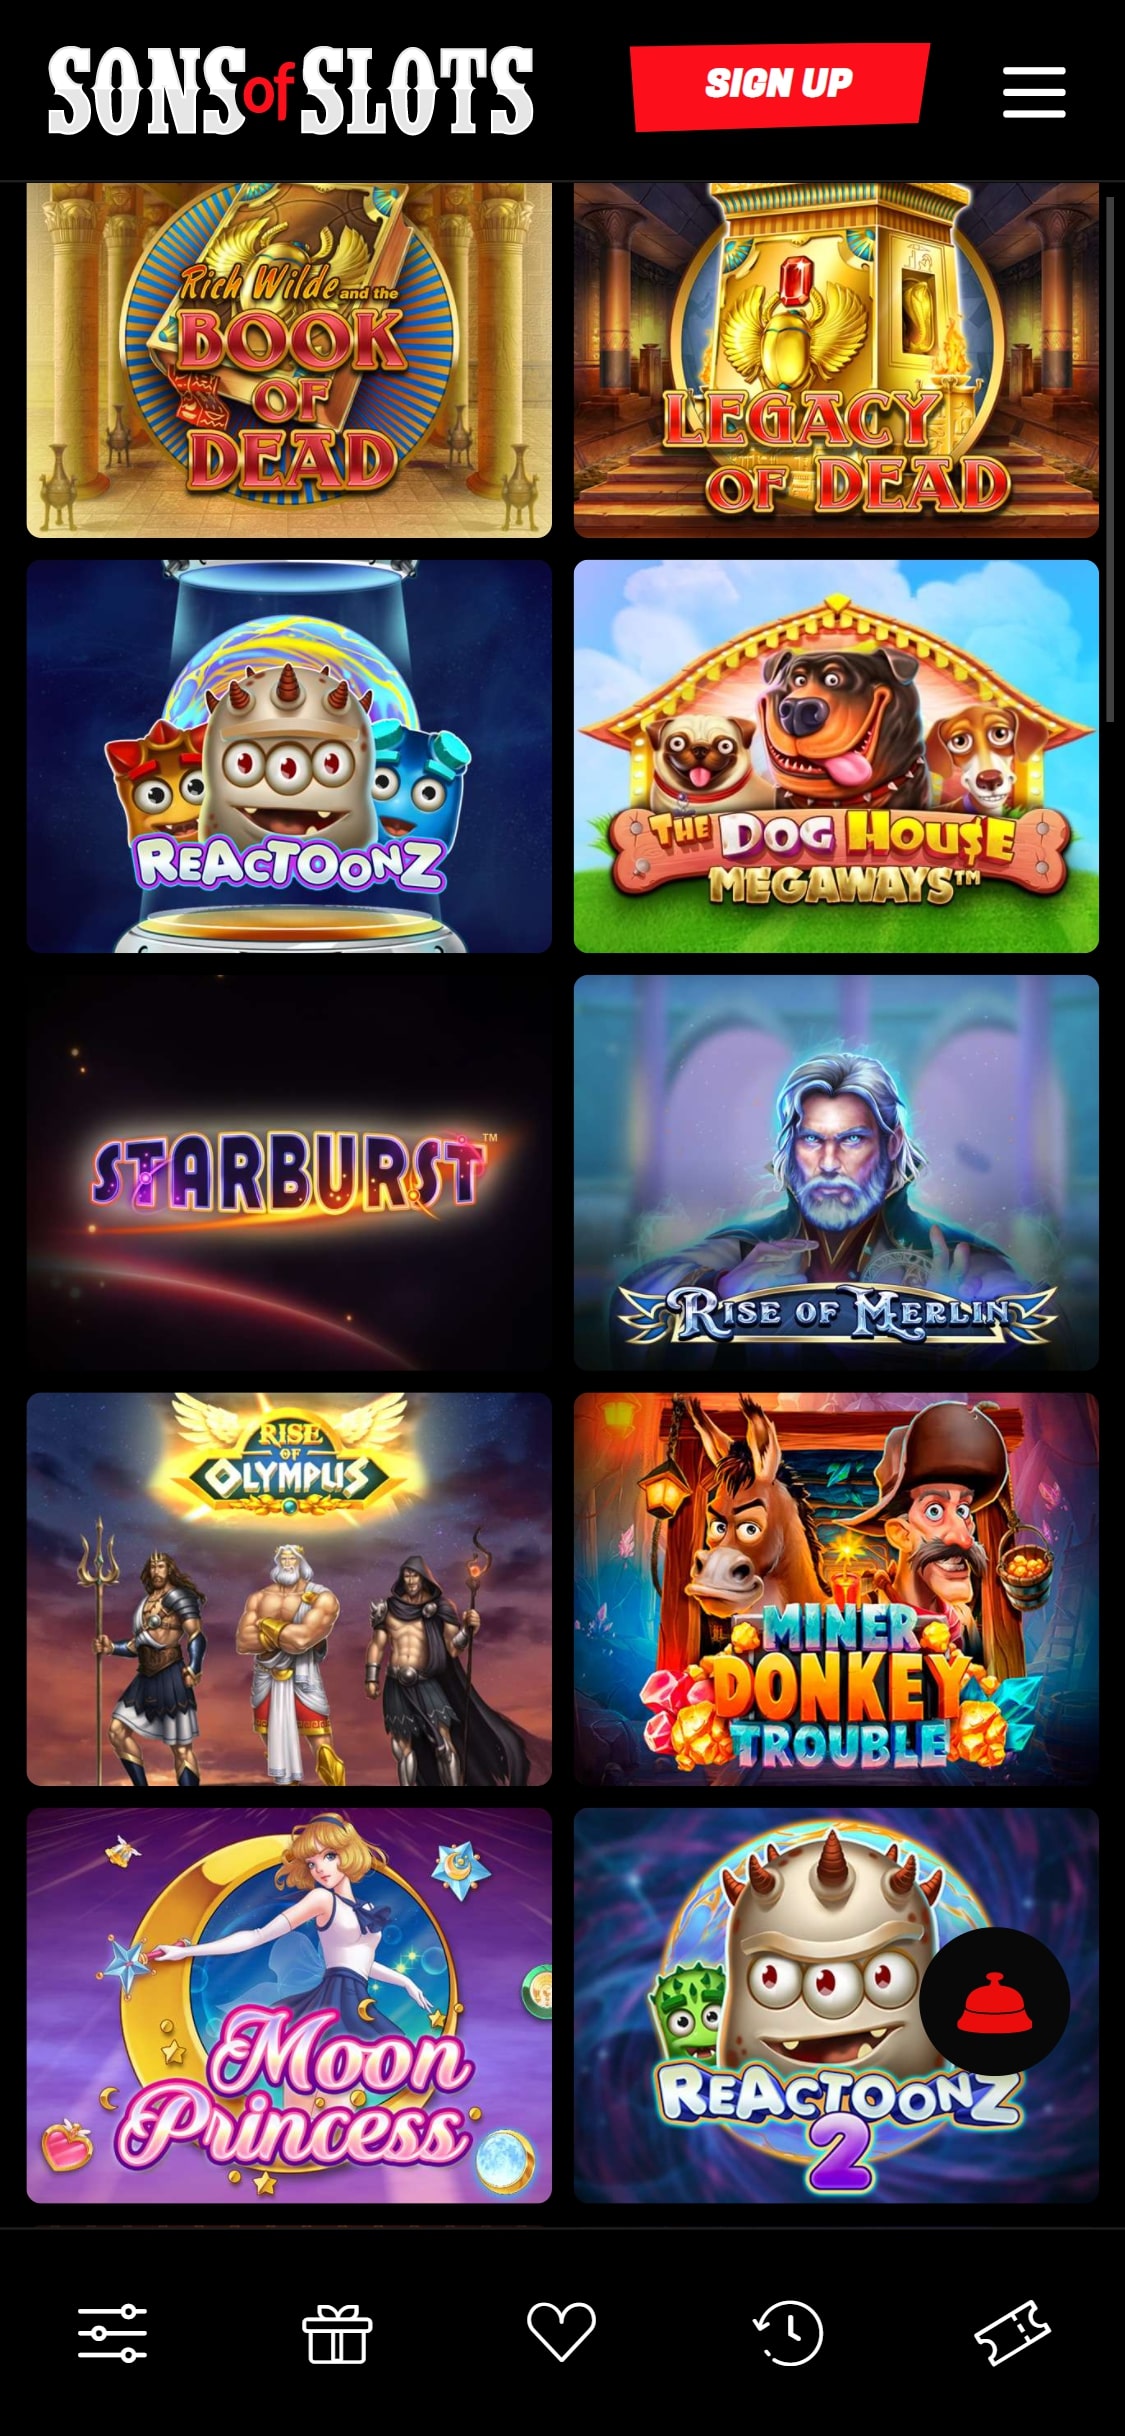 Sons of Slots Mobile Games Review